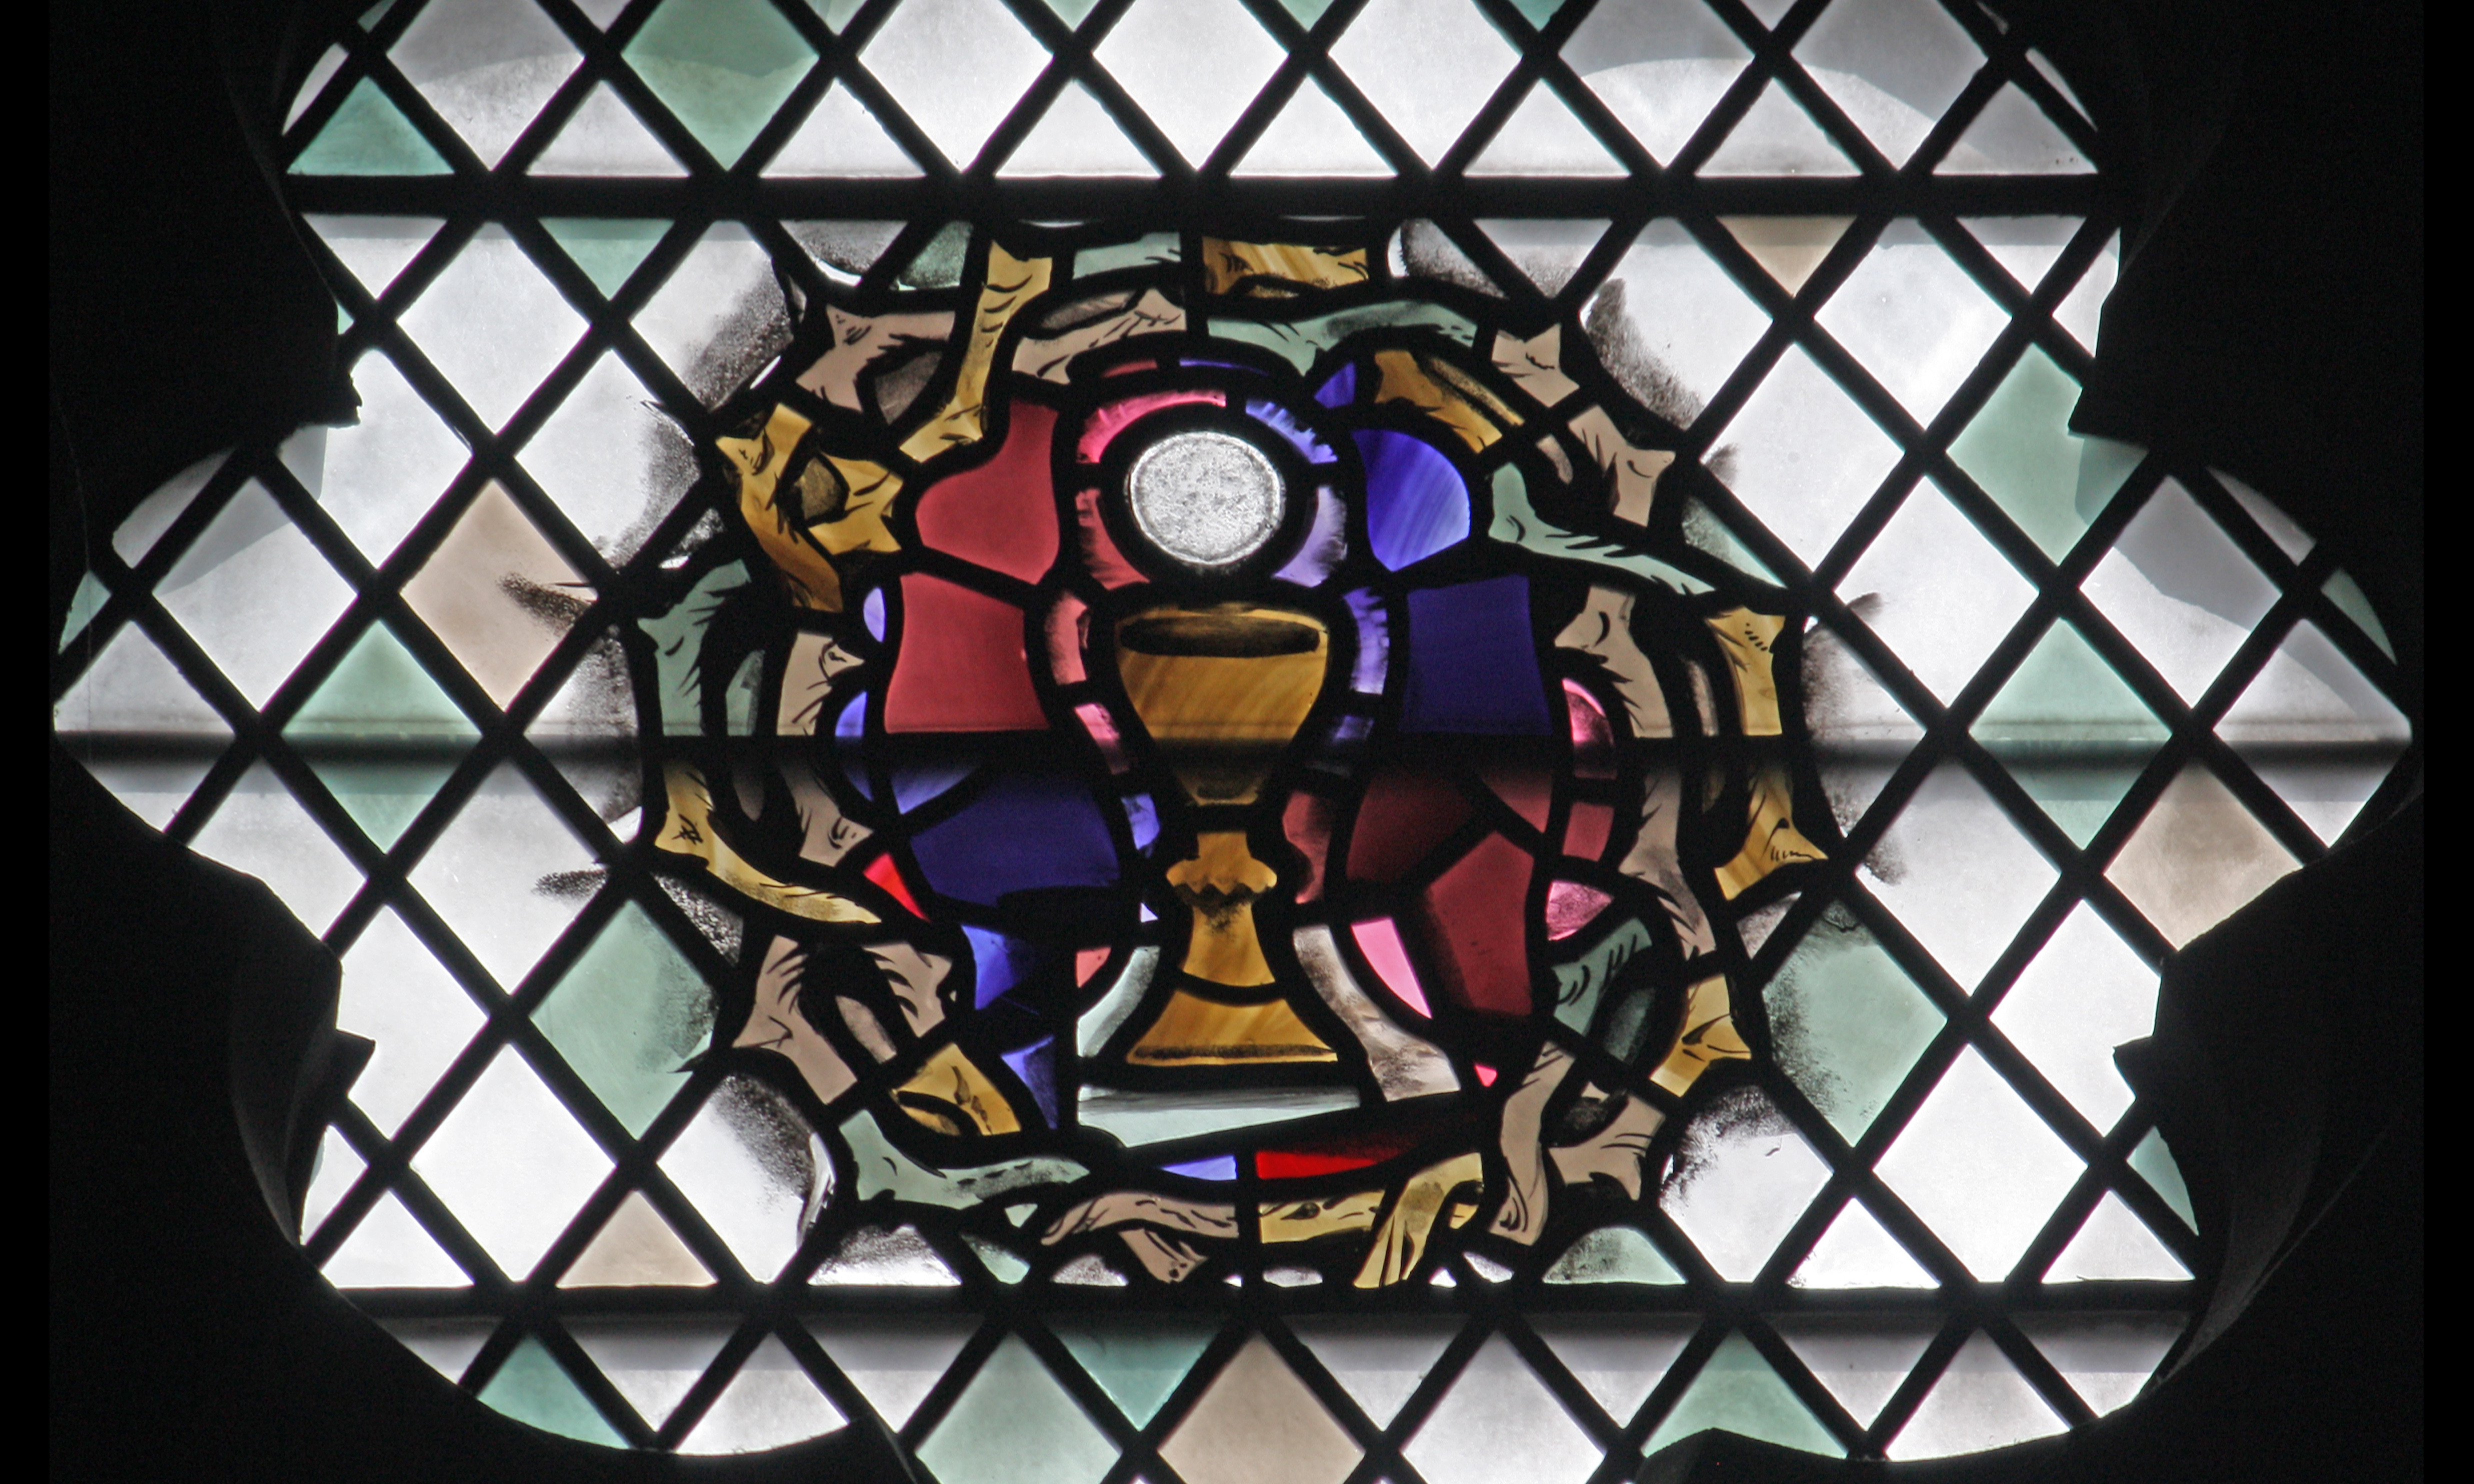 A chalice encircled by a crown of thorns.